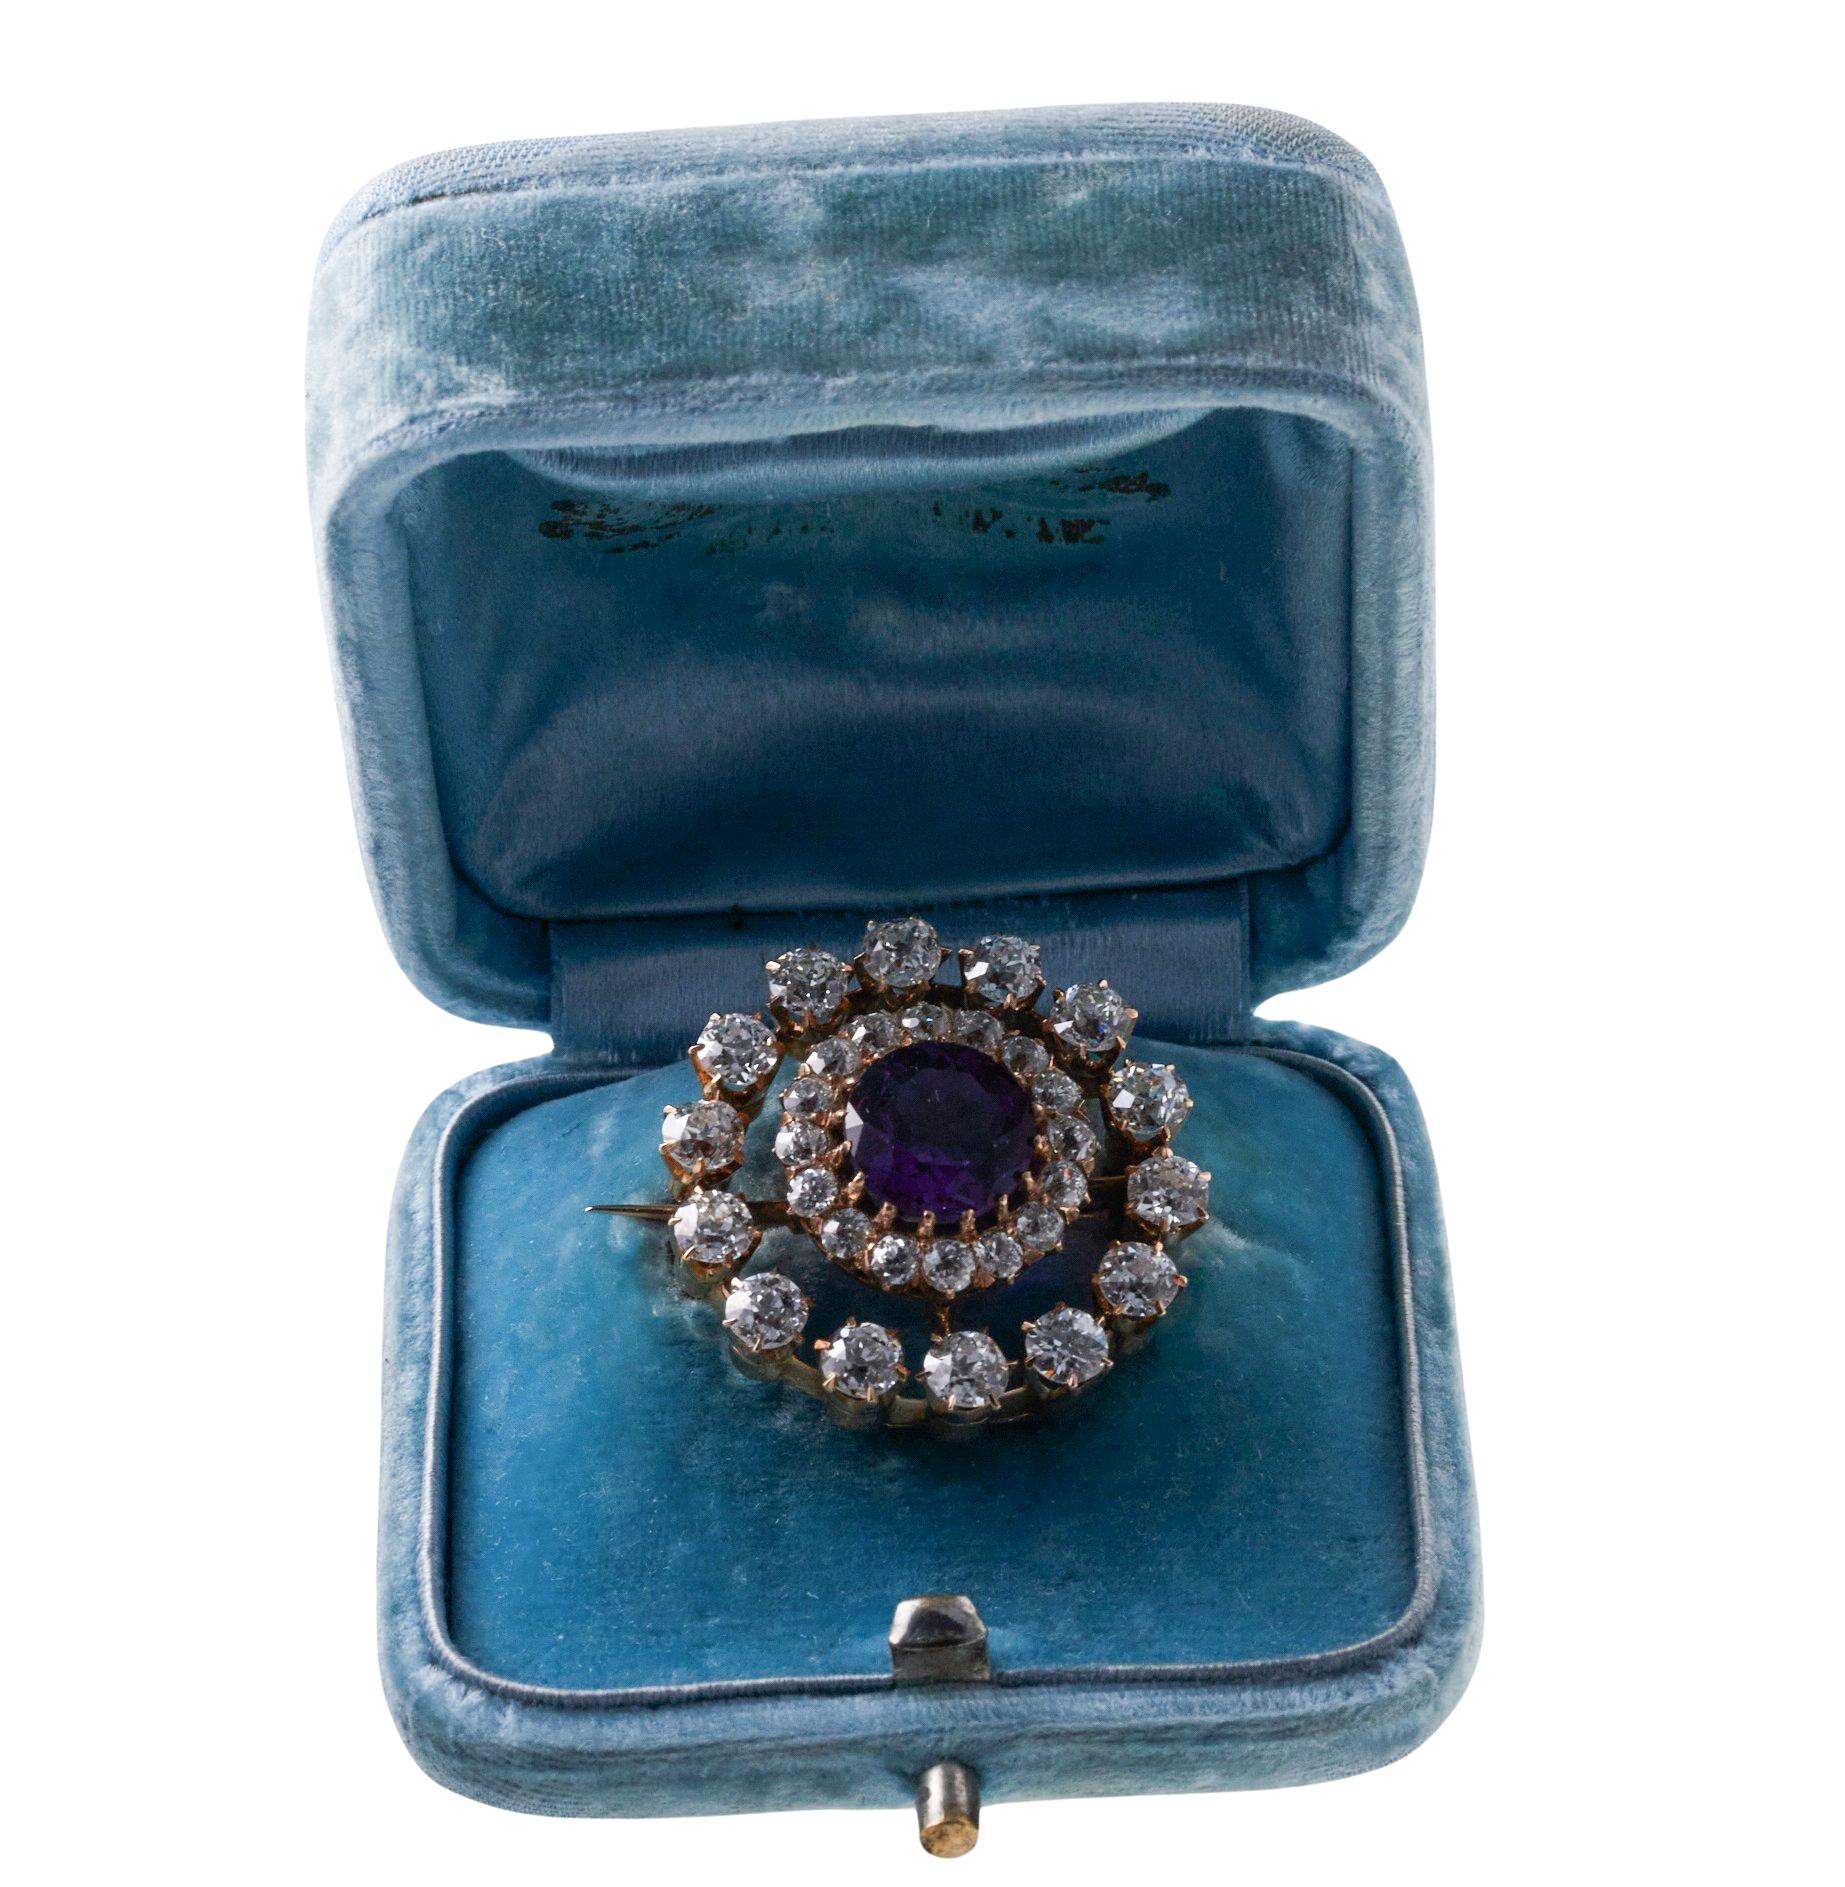 Antique 14k gold brooch, set with center 9.5mm amethyst, surrounded with approx. 3.40ctw diamonds. Brooch comes in original antique fitted box,. the brooch measures 26mm in diameter. Tested 14k. Weight - 9.4 grams. 